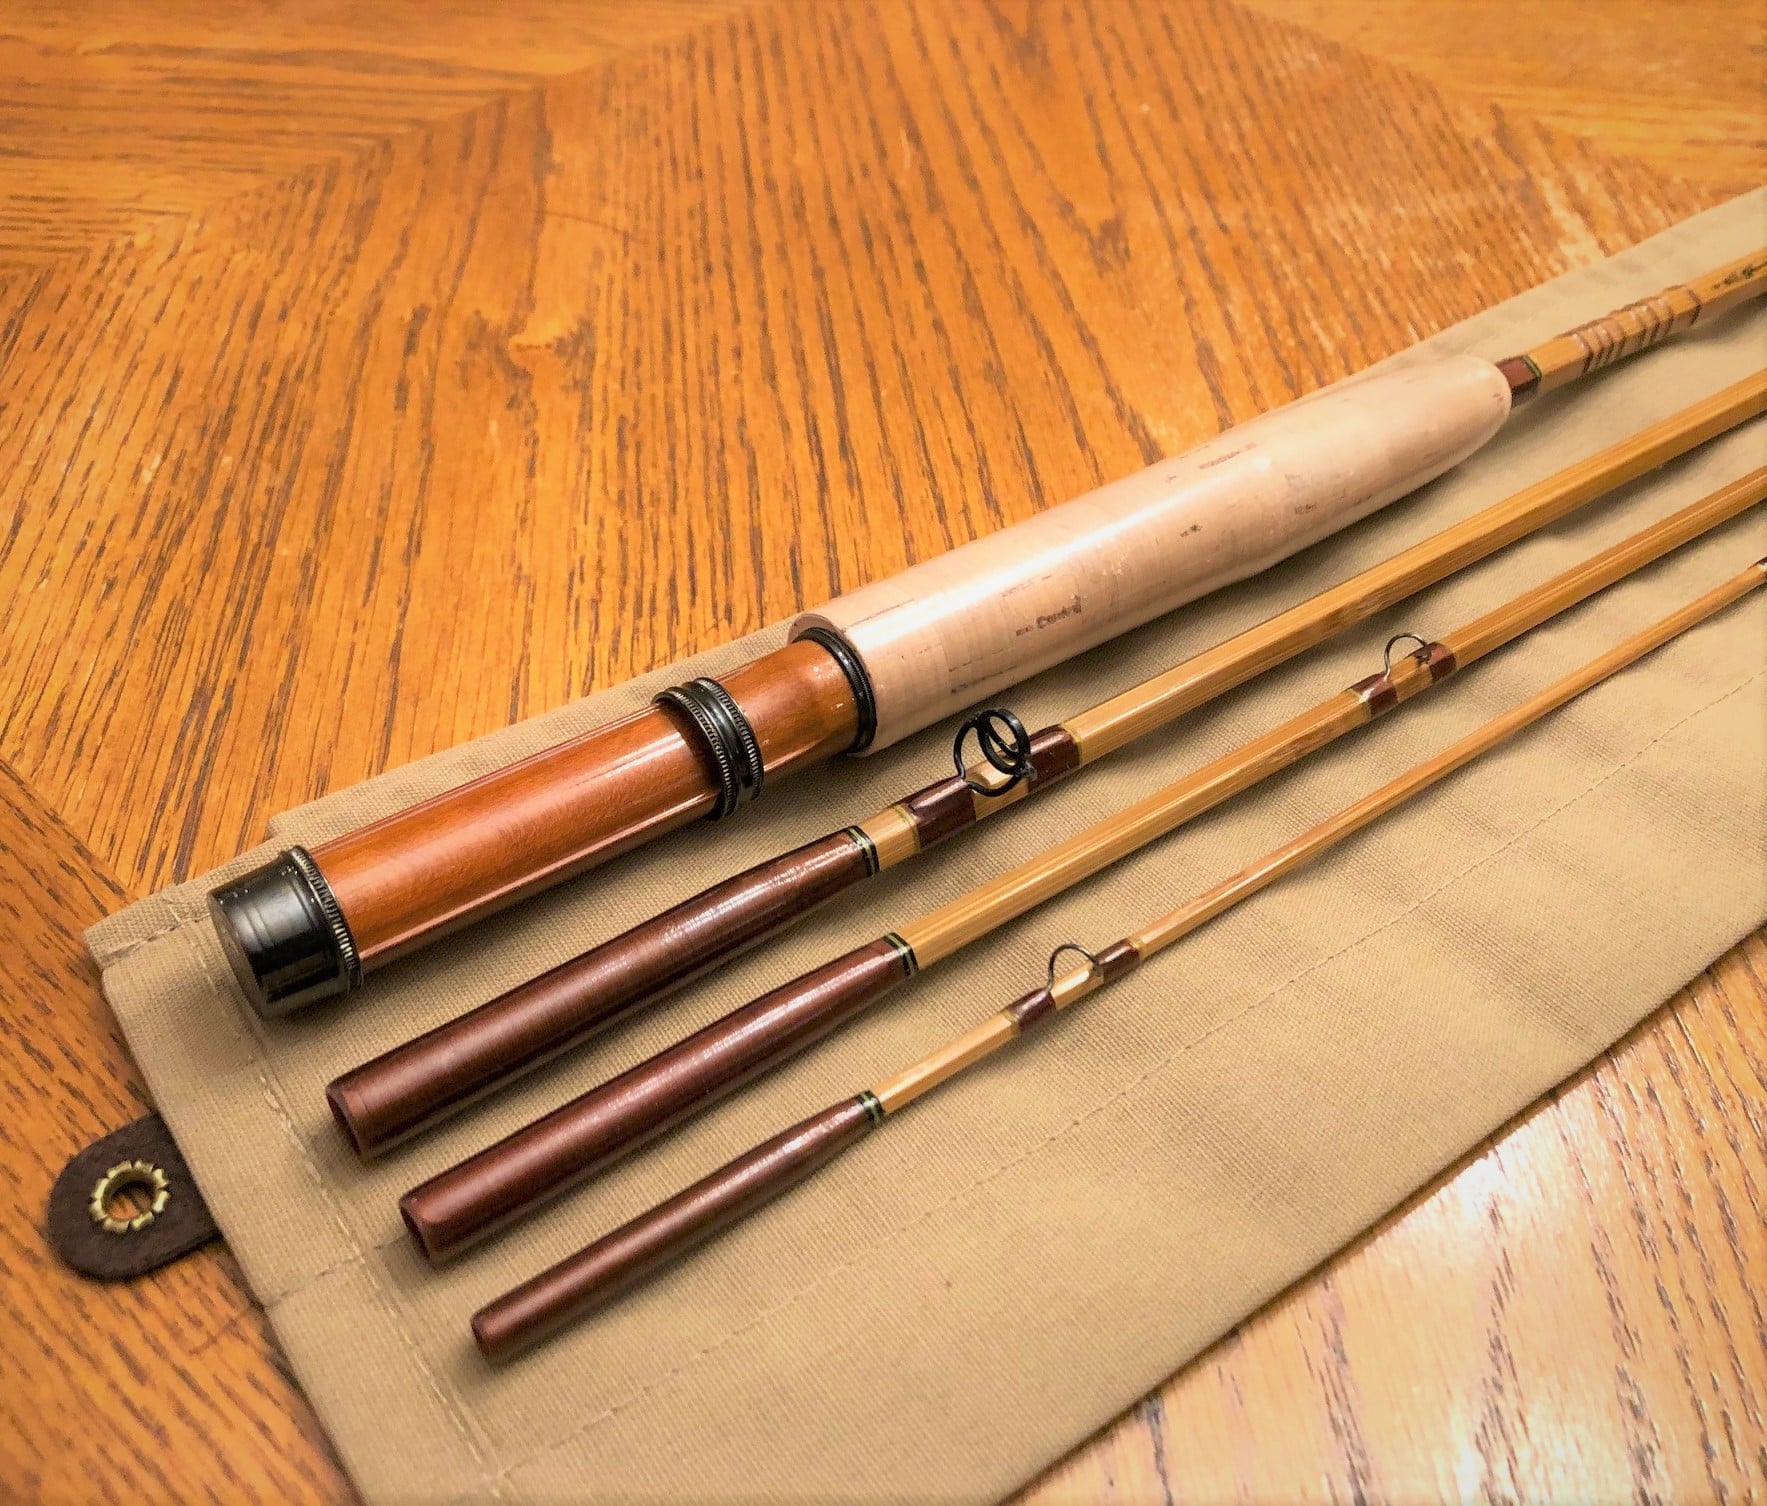 W.R Taylor split bamboo fly rods